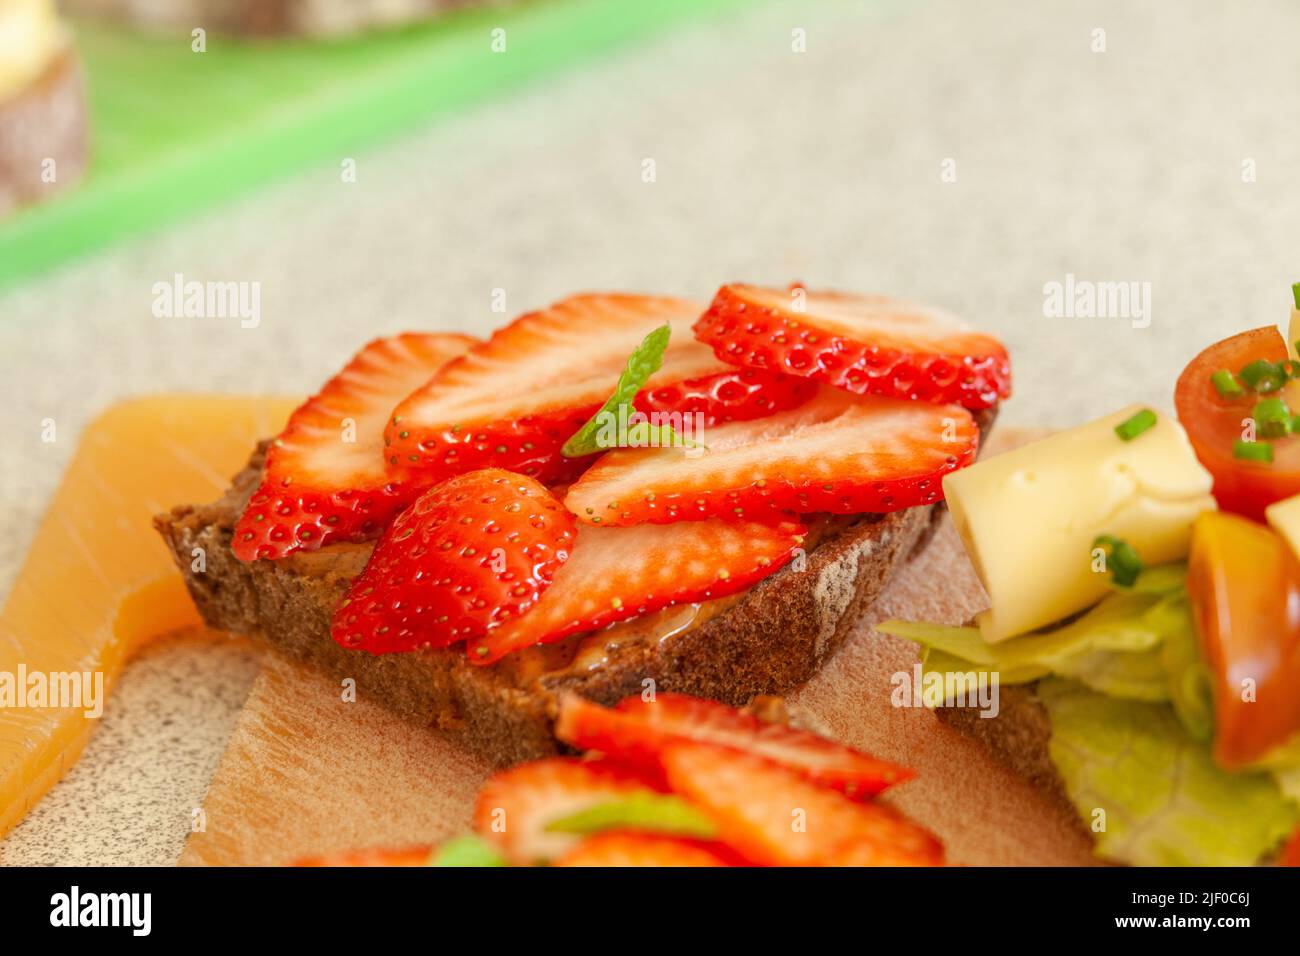 Danish style open sandwich of strawberries and peanut butter. Stock Photo